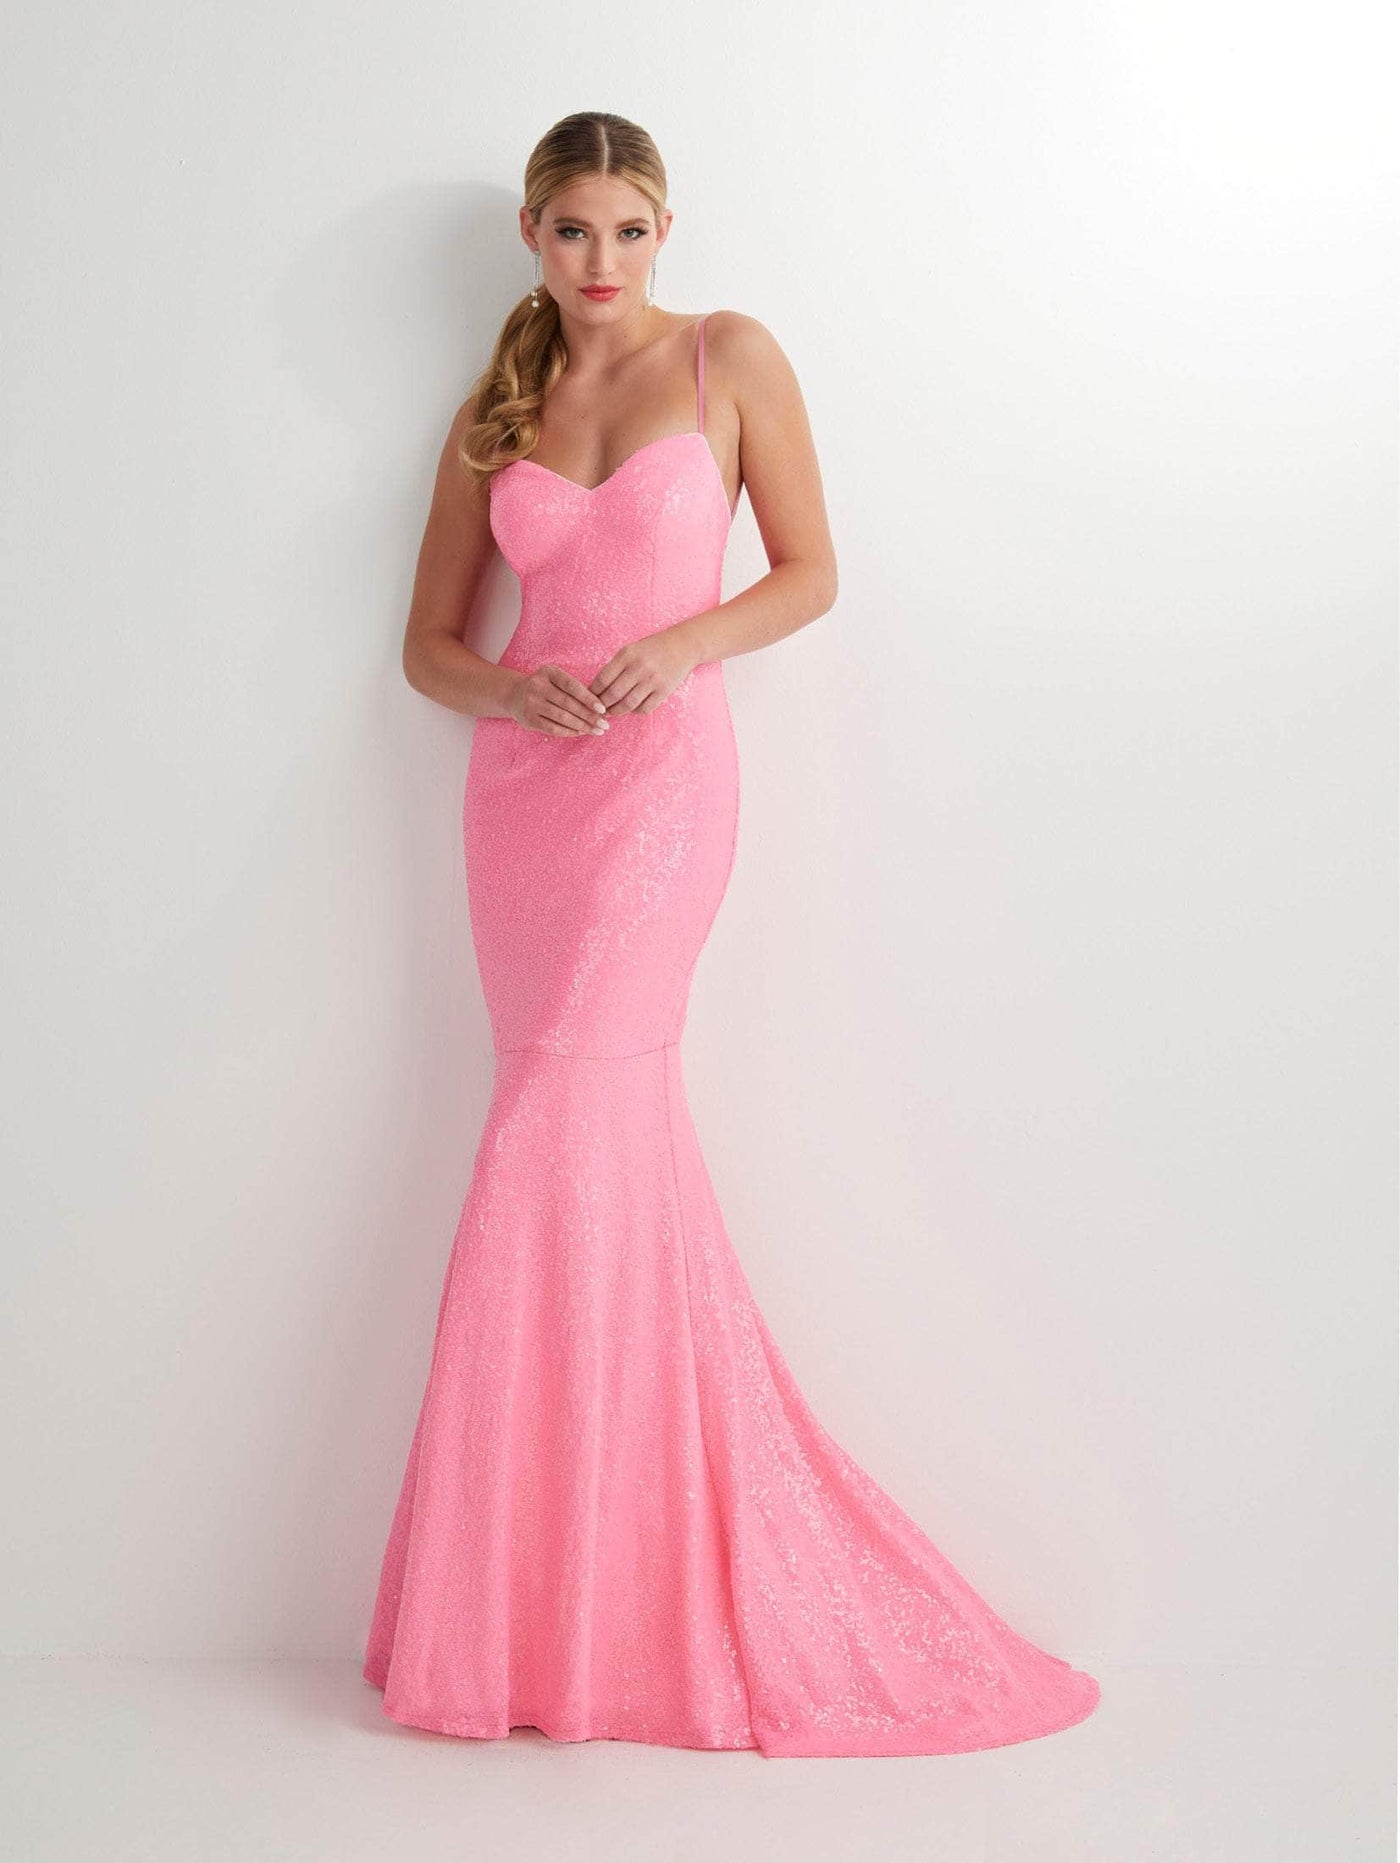 Studio 17 Prom 12912 - Sleeveless Sweetheart Prom Gown Special Occasion Dress